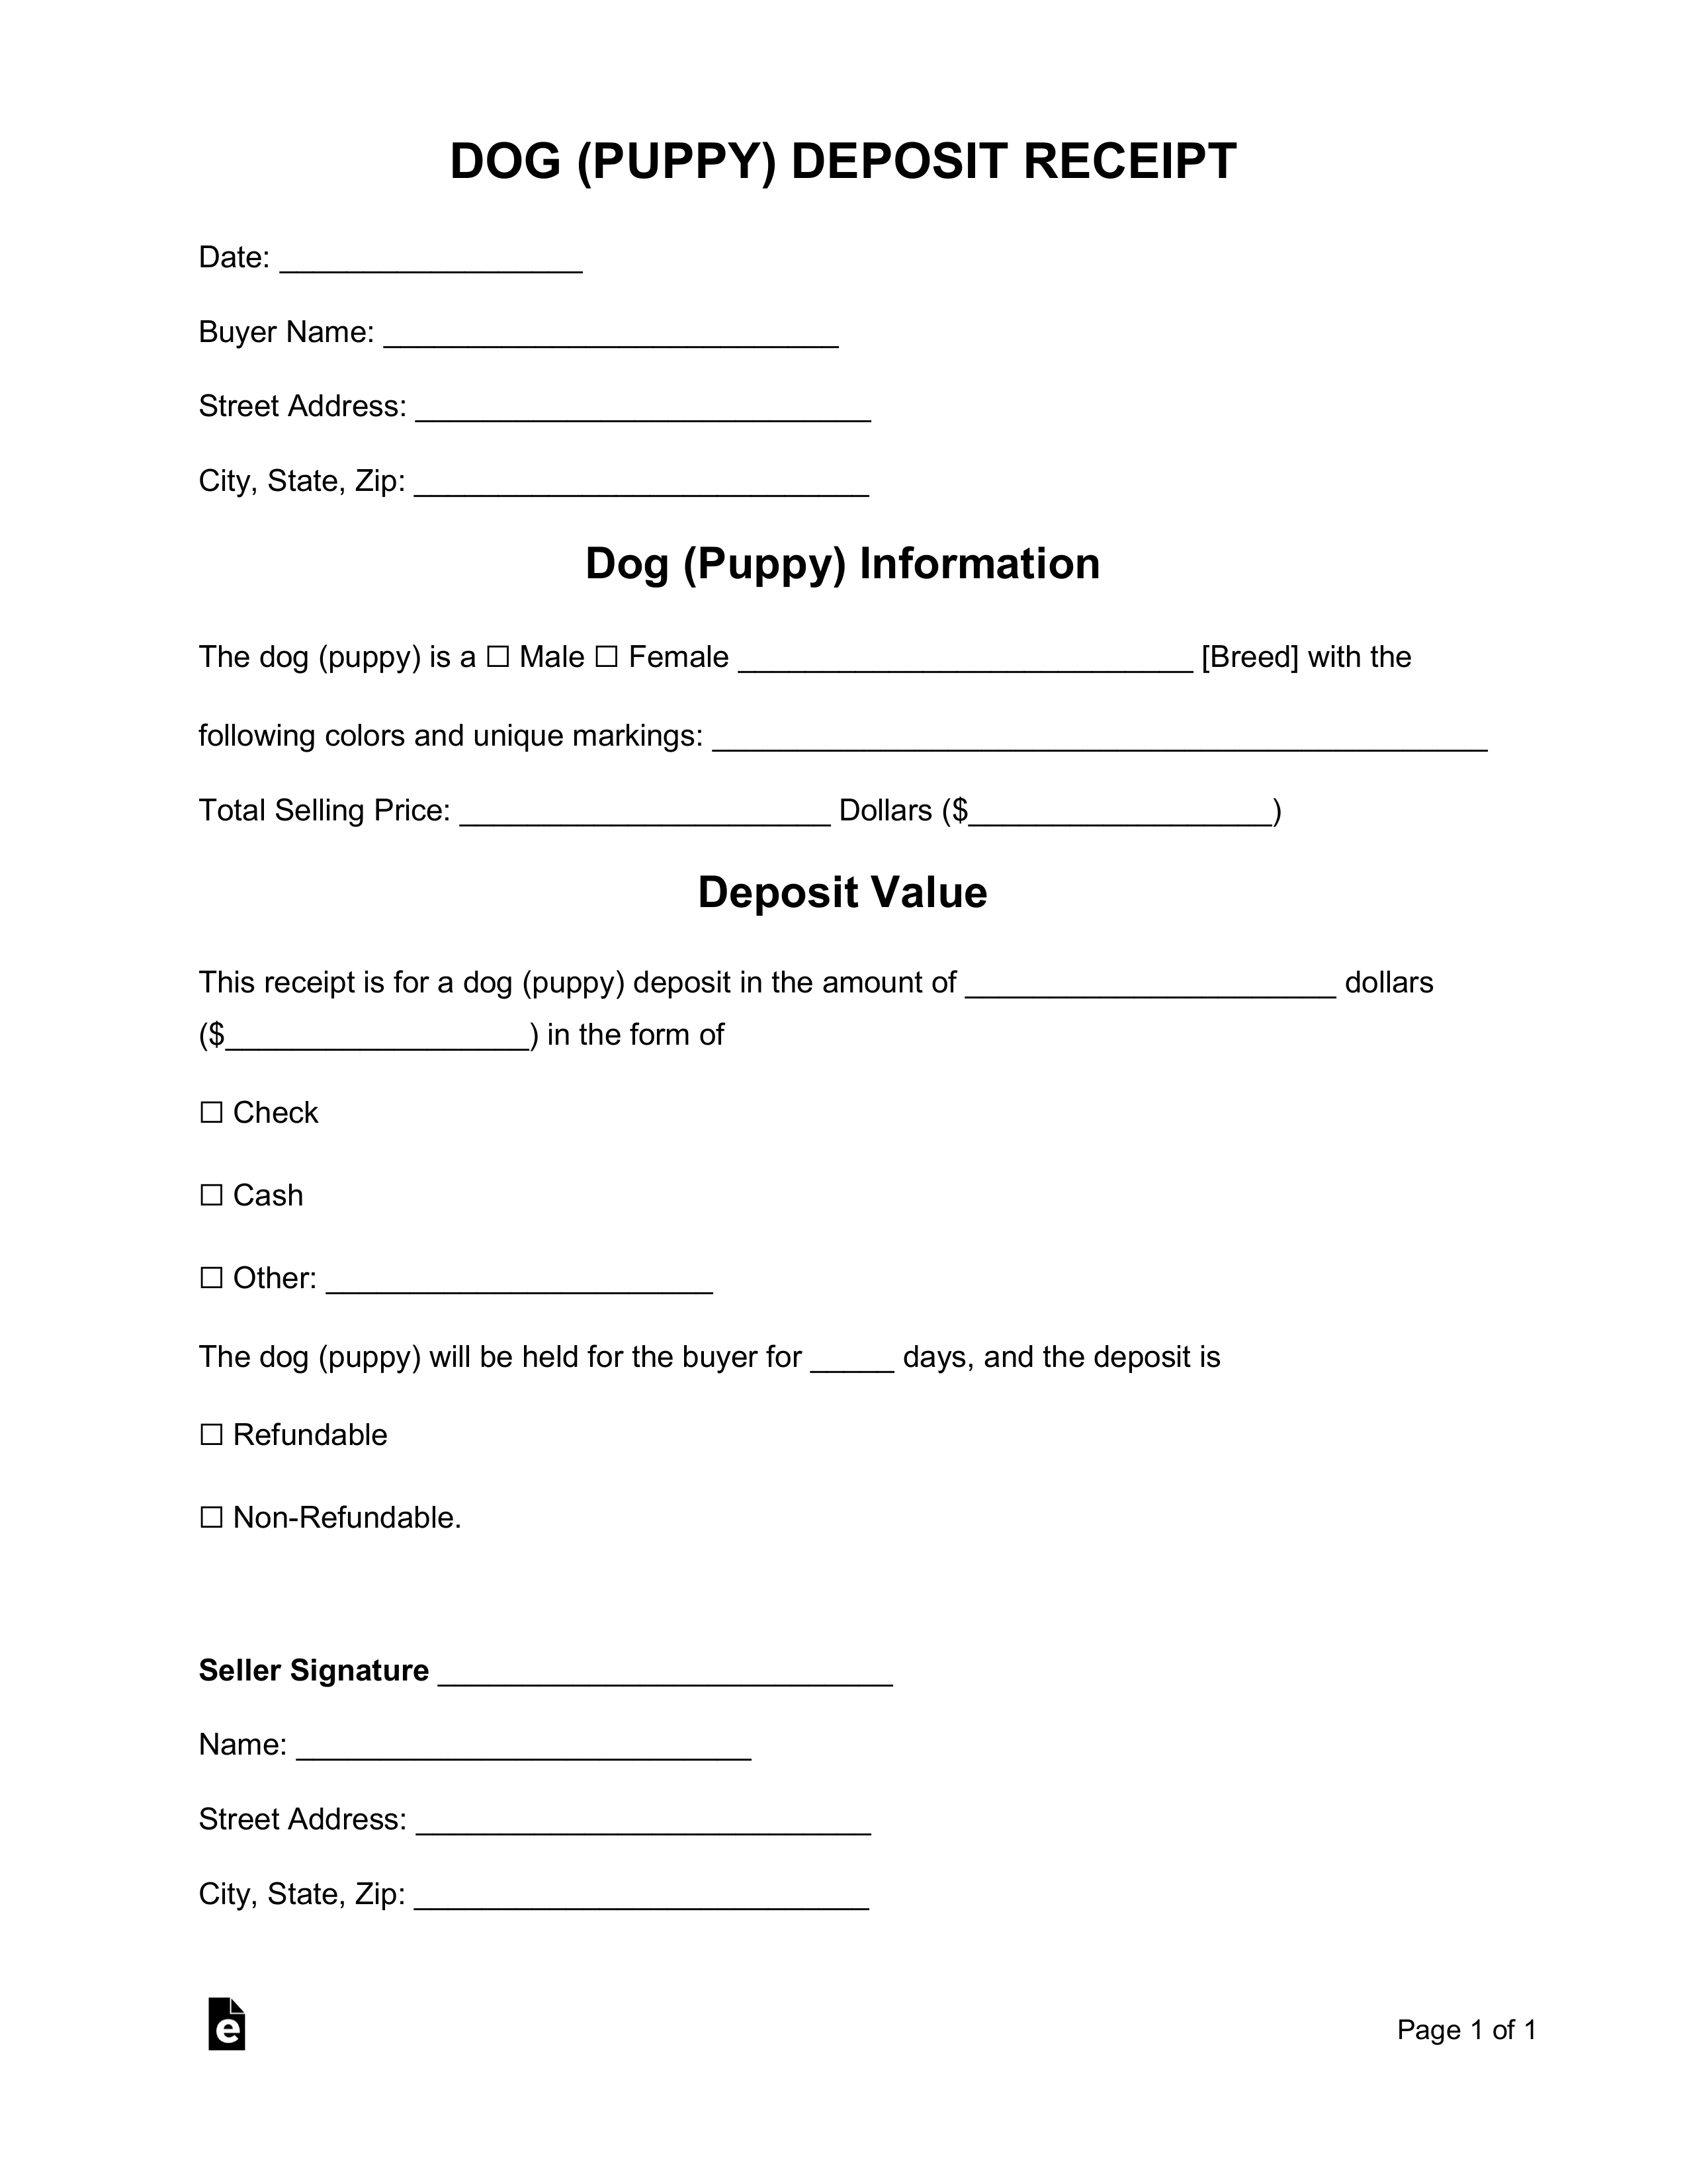 Free Dog (Puppy) Deposit Receipt Template - Word  PDF – eForms For Refundable Deposit Agreement Template Within Refundable Deposit Agreement Template